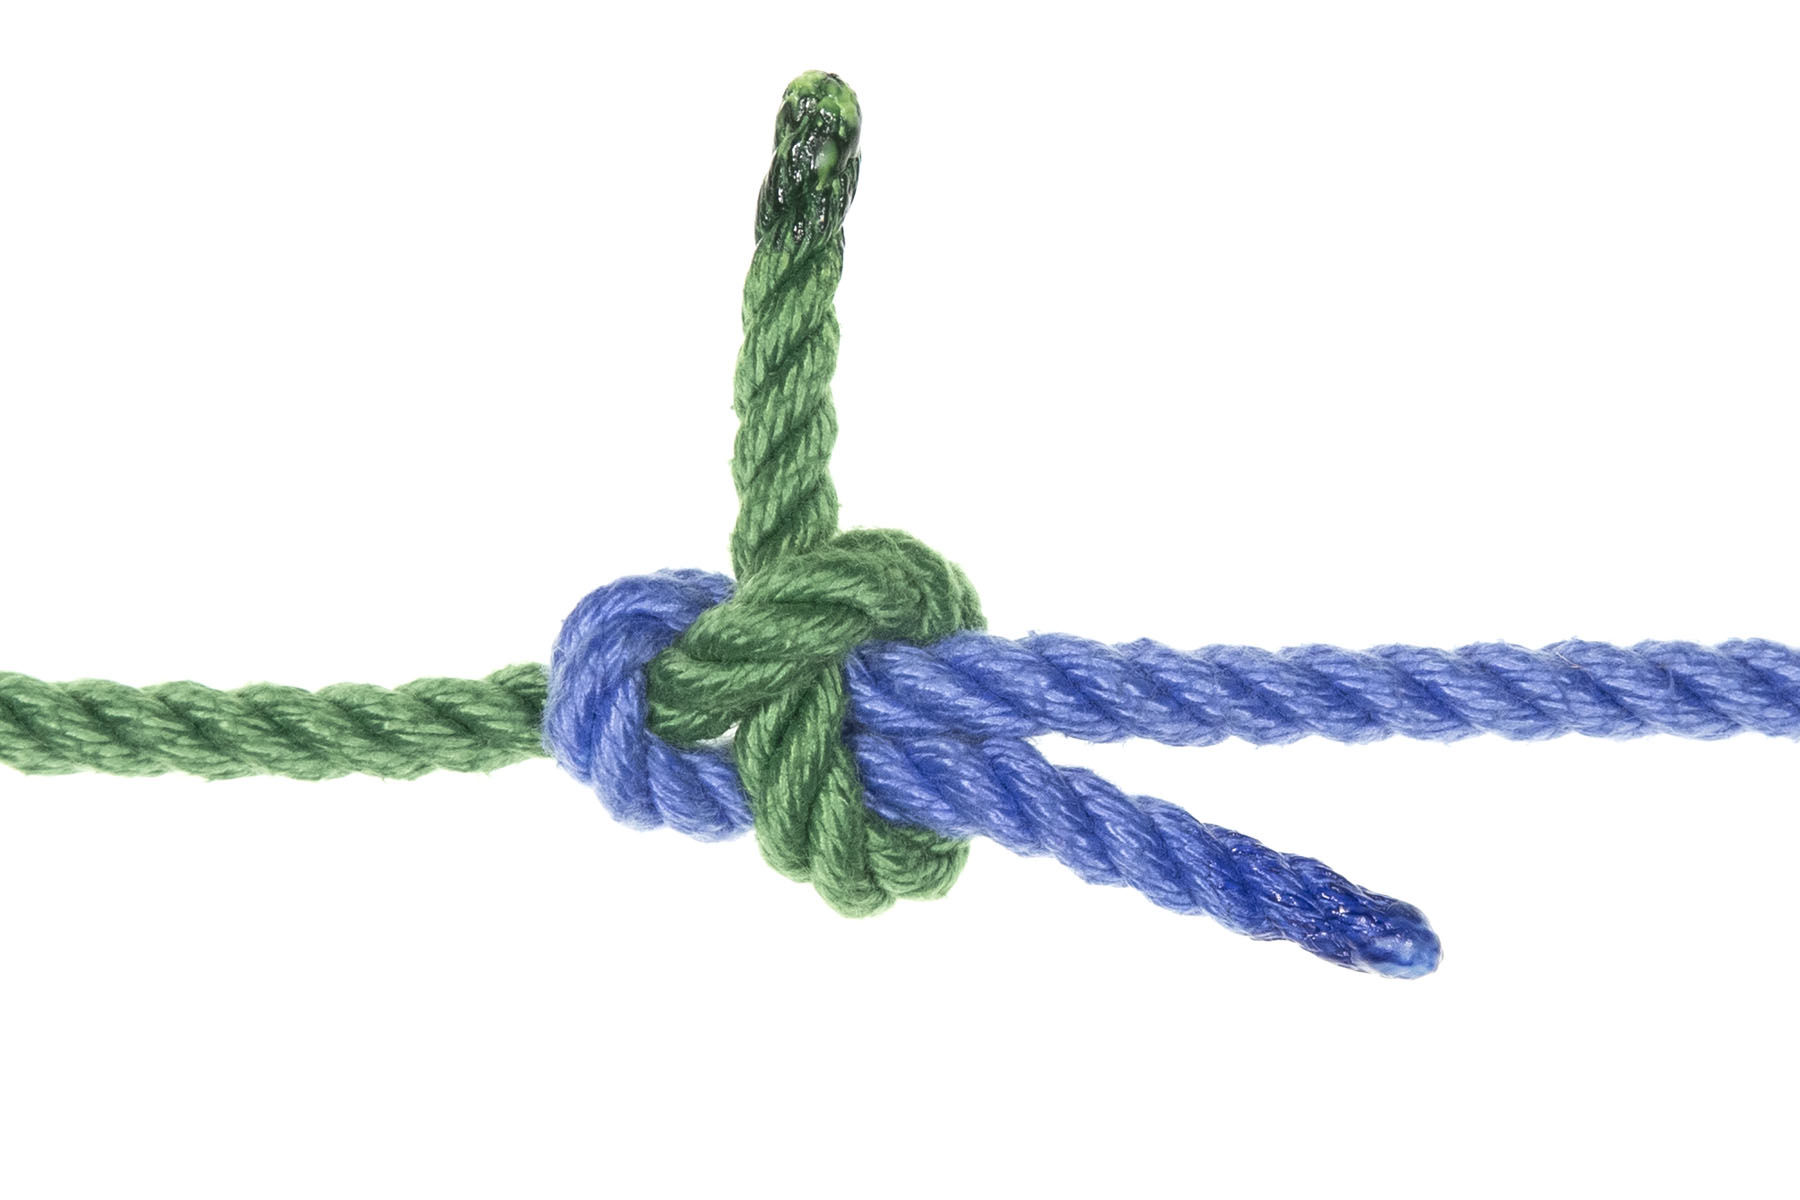 A completed left-hand sheet bend. A single blue rope enters from the left, connects to a single green rope that enters from the right, and then doubles back, lying next to and just below itself. The green rope goes under the bight of the blue rope, under both parts of the blue rope, the over both parts of the blue rope and under itself, with the end of the rope pointing straight up. The critical point here is that the working end of the blue rope lies below its standing part, but the working end of the green rope is above its standing part.